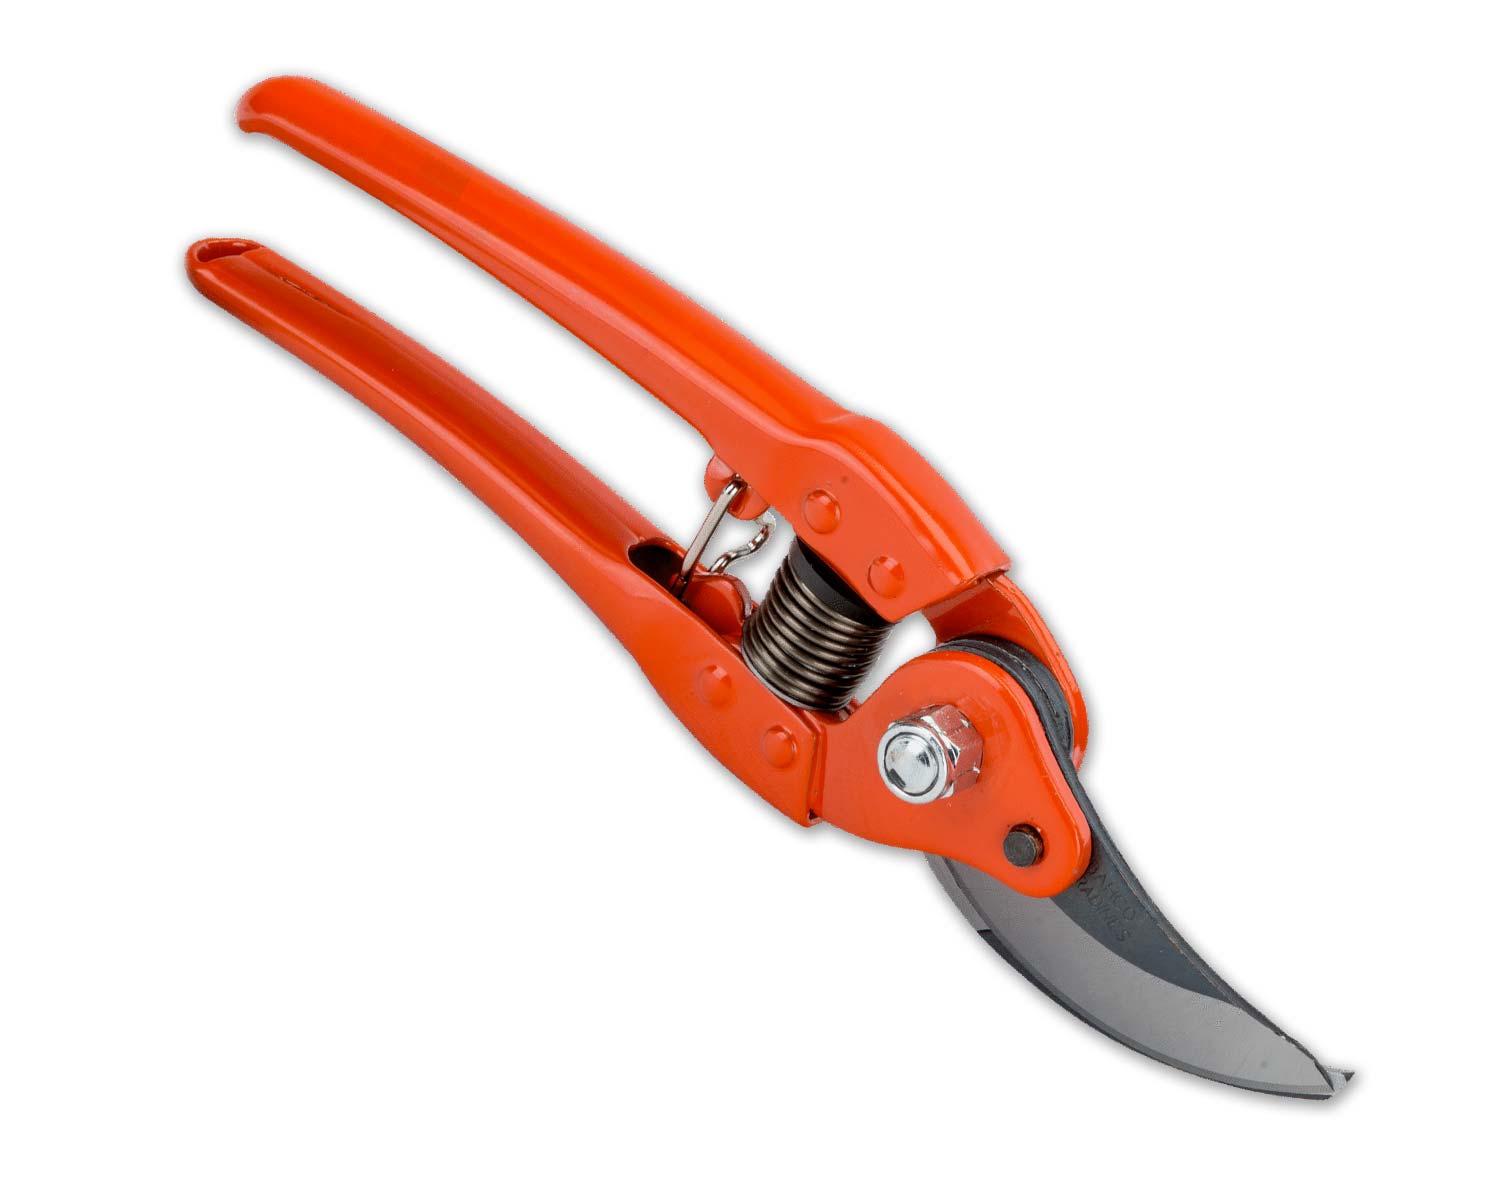 Professional bypass secateurs - Bahco P110